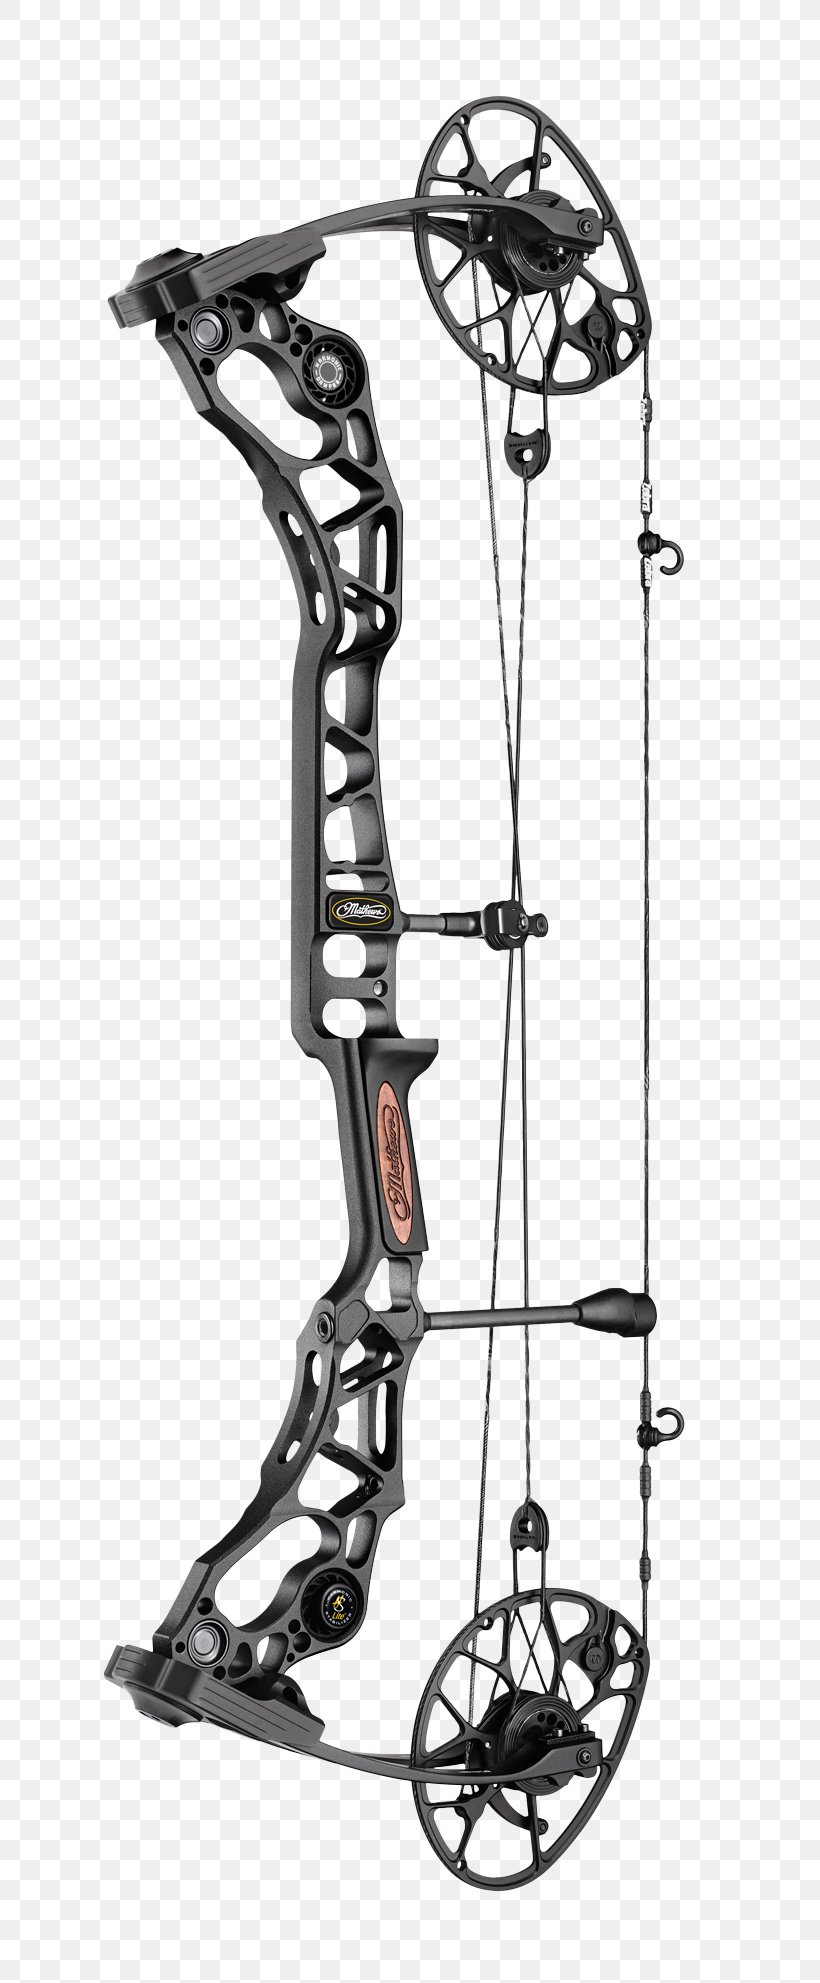 Compound Bows Bow And Arrow Mathews Archery, Inc. Hunting, PNG, 816x1983px, Compound Bows, Archery, Auto Part, Bit, Bow Download Free